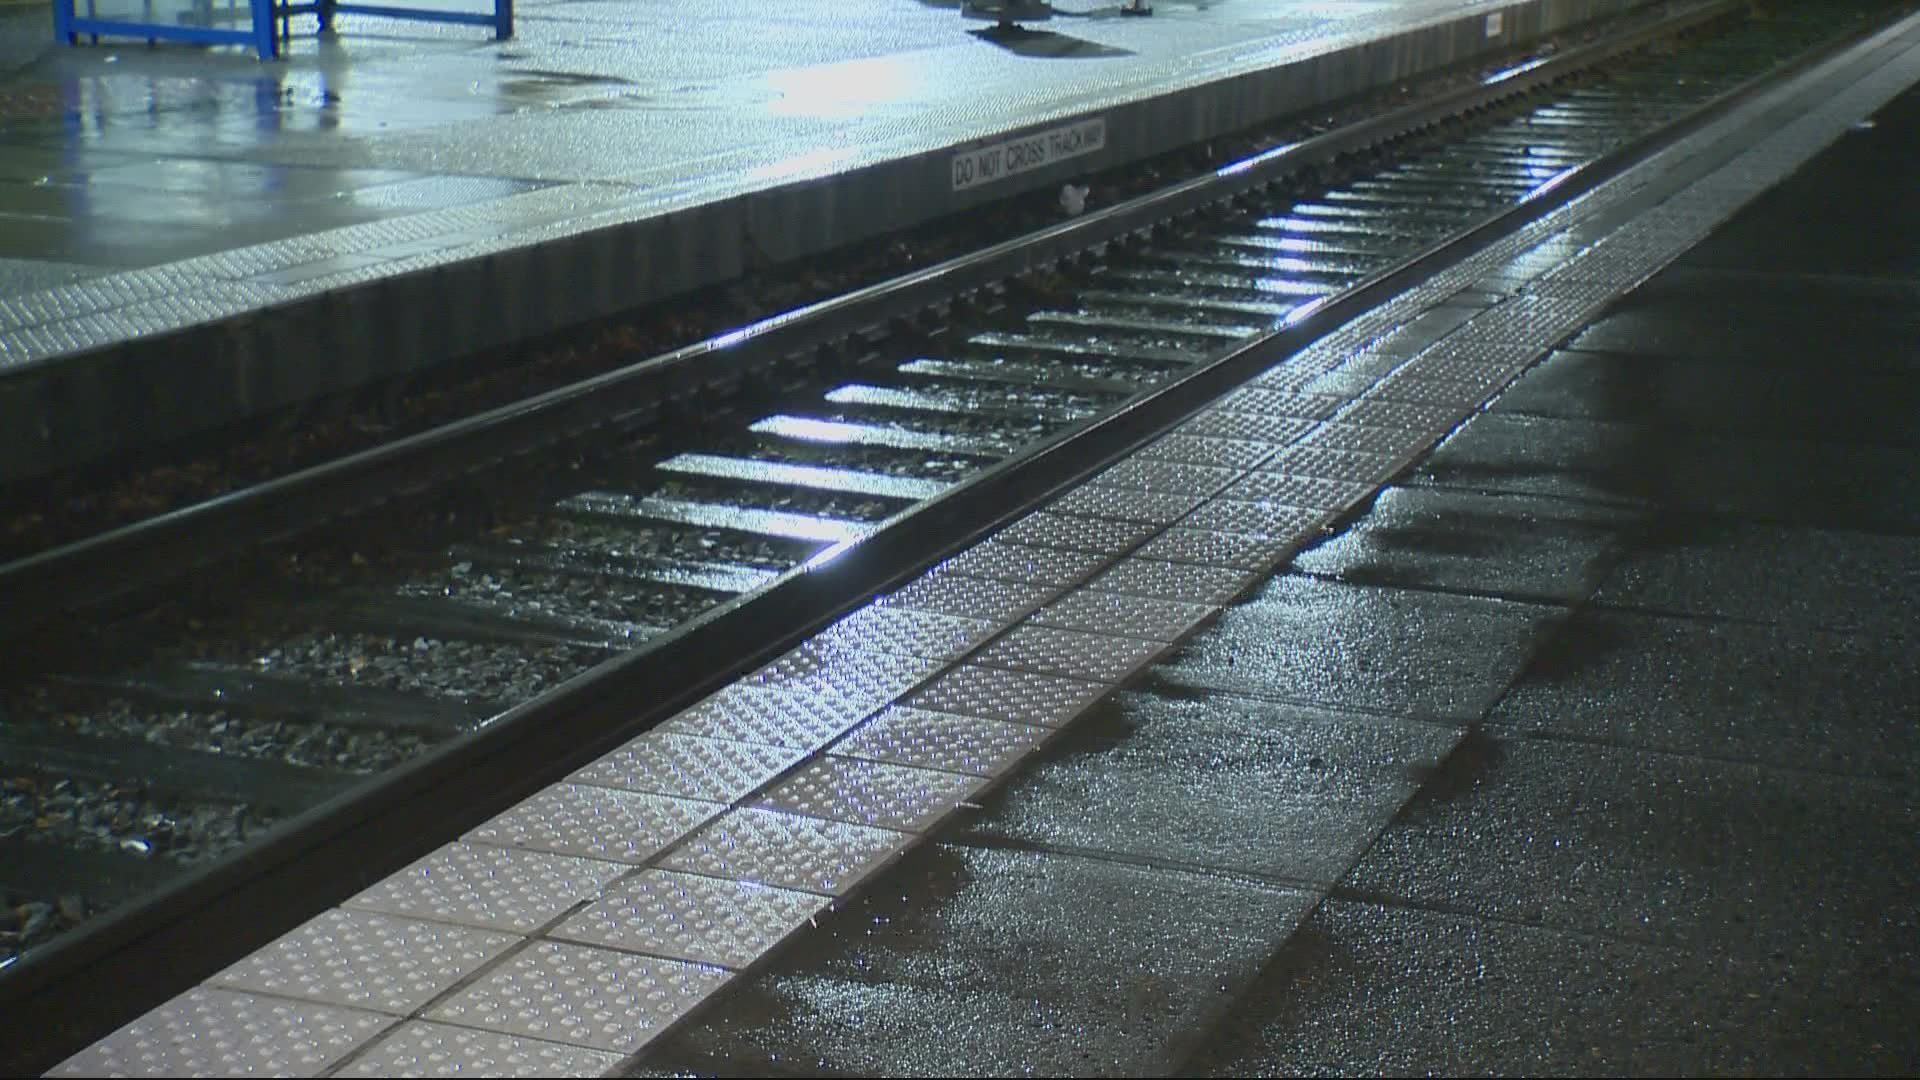 A woman pushed a 3-year-old off the Gateway Transit Center station platform and onto the tracks Wednesday. No train was coming and the child was not seriously hurt.